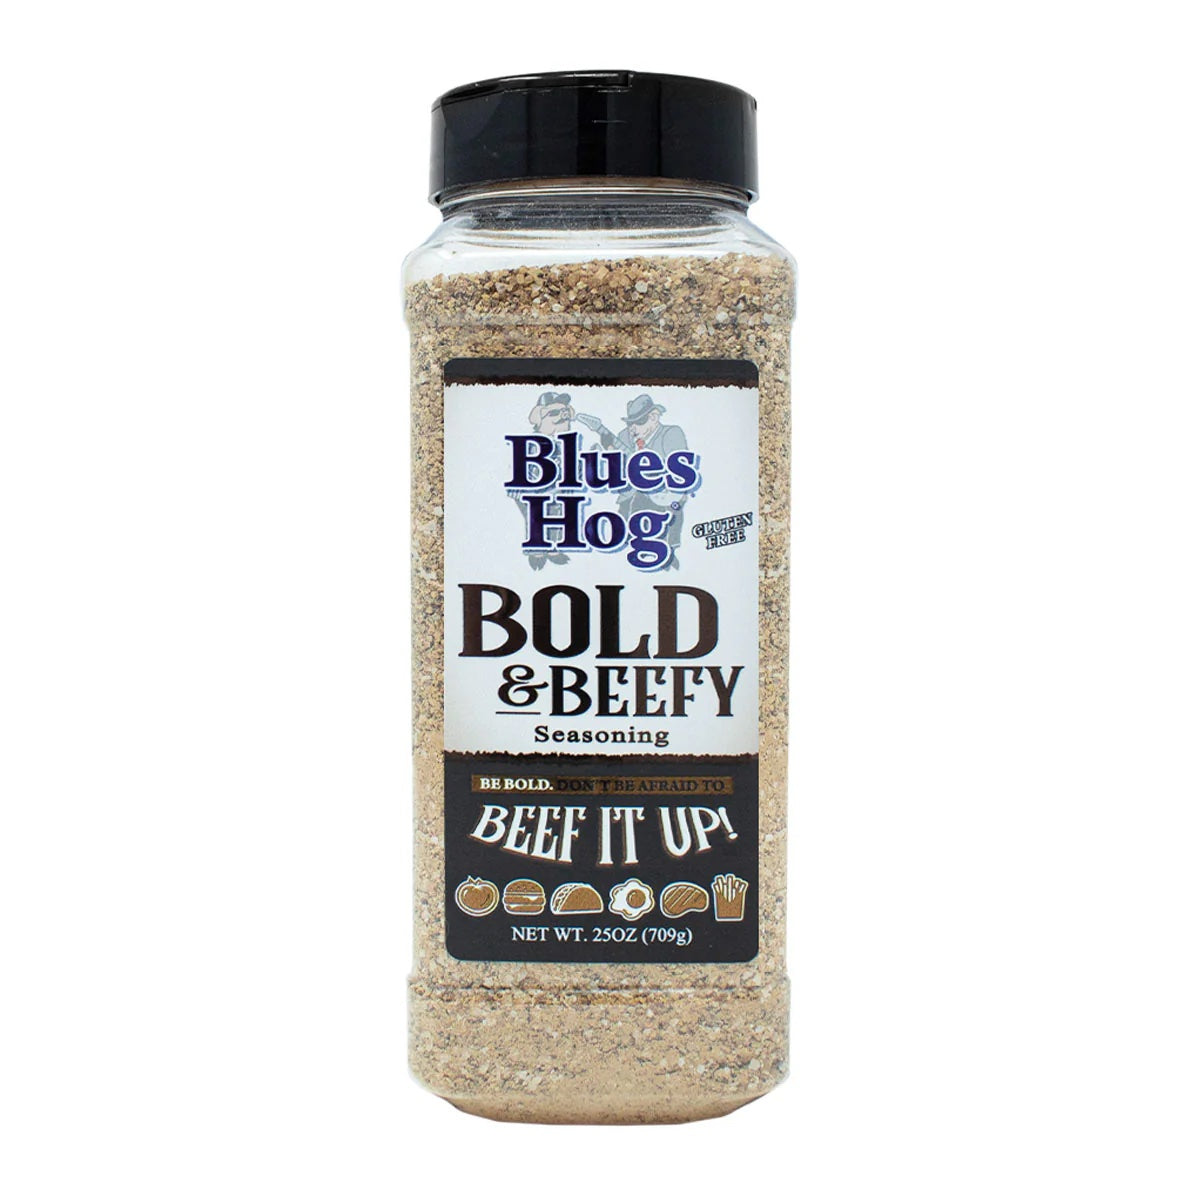 The front of a jar of Blues Hog Bold & Beefy Seasoning with a black lid. The label features the Blues Hog logo with two cartoon pigs dressed as musicians. The label reads 'Blues Hog Bold & Beefy Seasoning' and indicates that the product is gluten-free with a net weight of 25 ounces (709 grams). Below, it suggests to 'Be bold. Don’t be afraid to beef it up!' with icons of various foods suitable for seasoning.